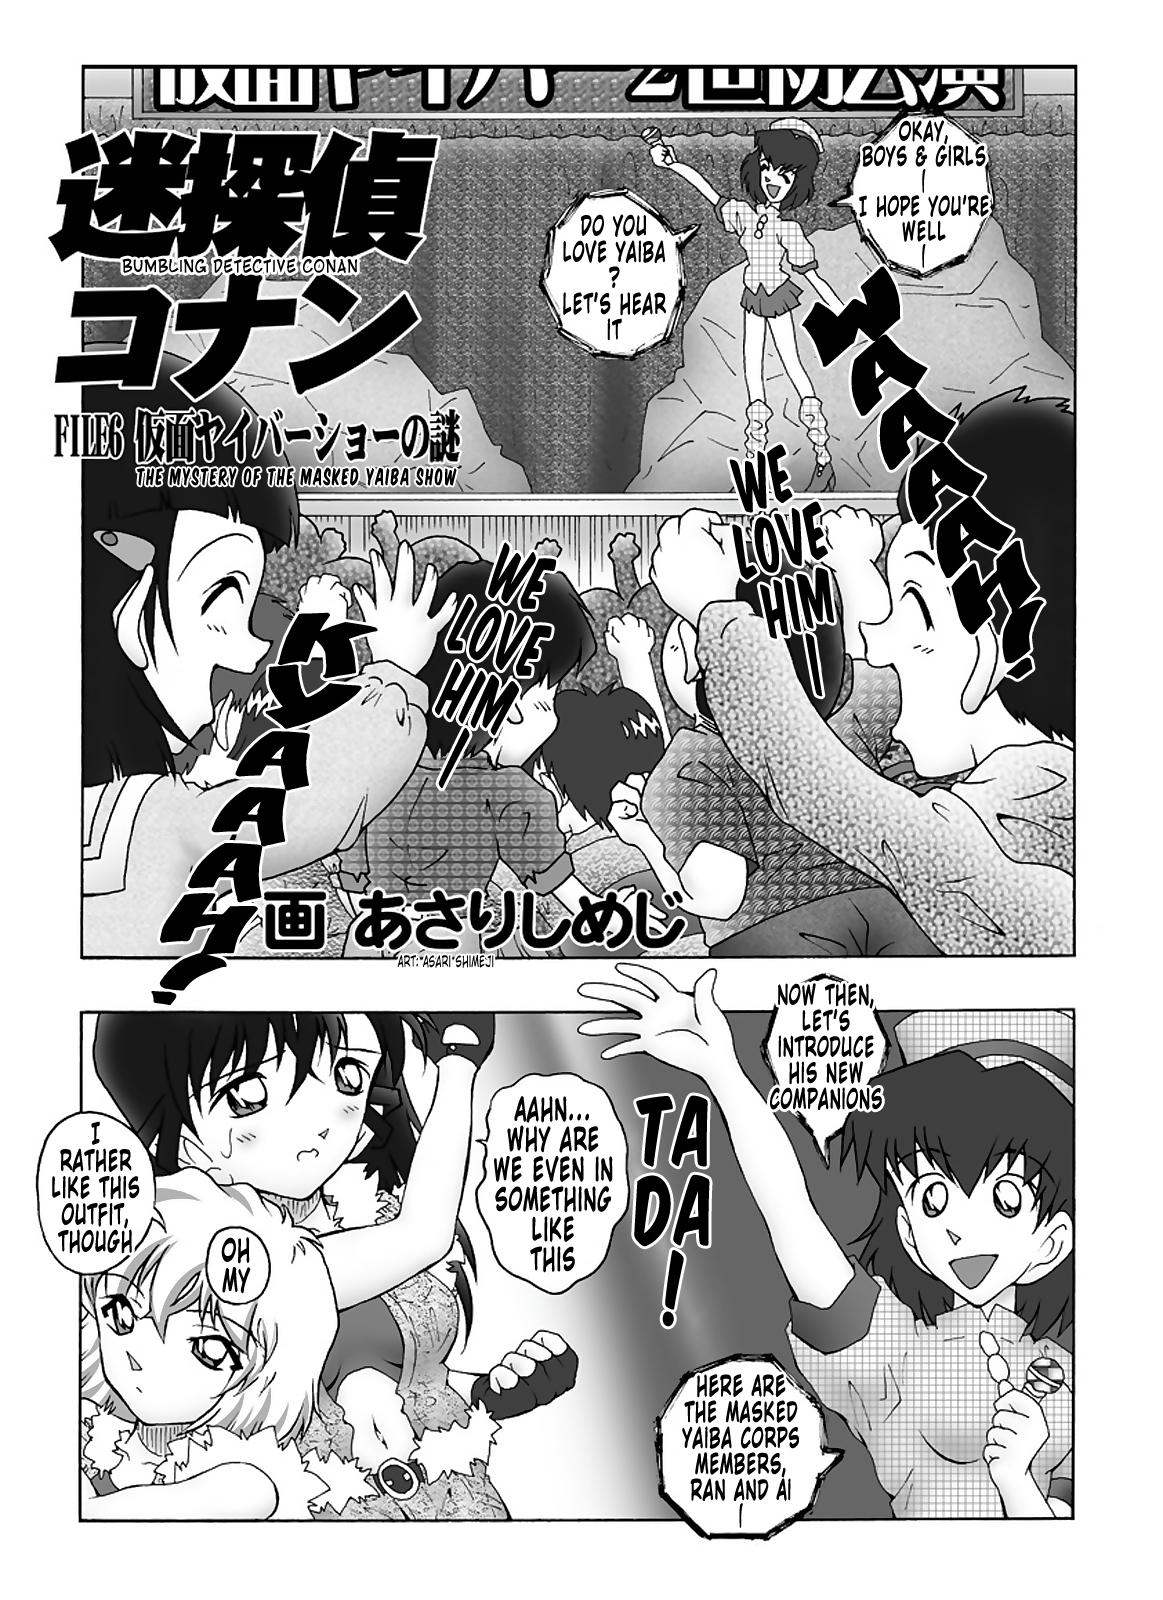 Adult Toys Bumbling Detective Conan - File 6: The Mystery Of The Masked Yaiba Show - Detective conan Fantasy Massage - Page 4